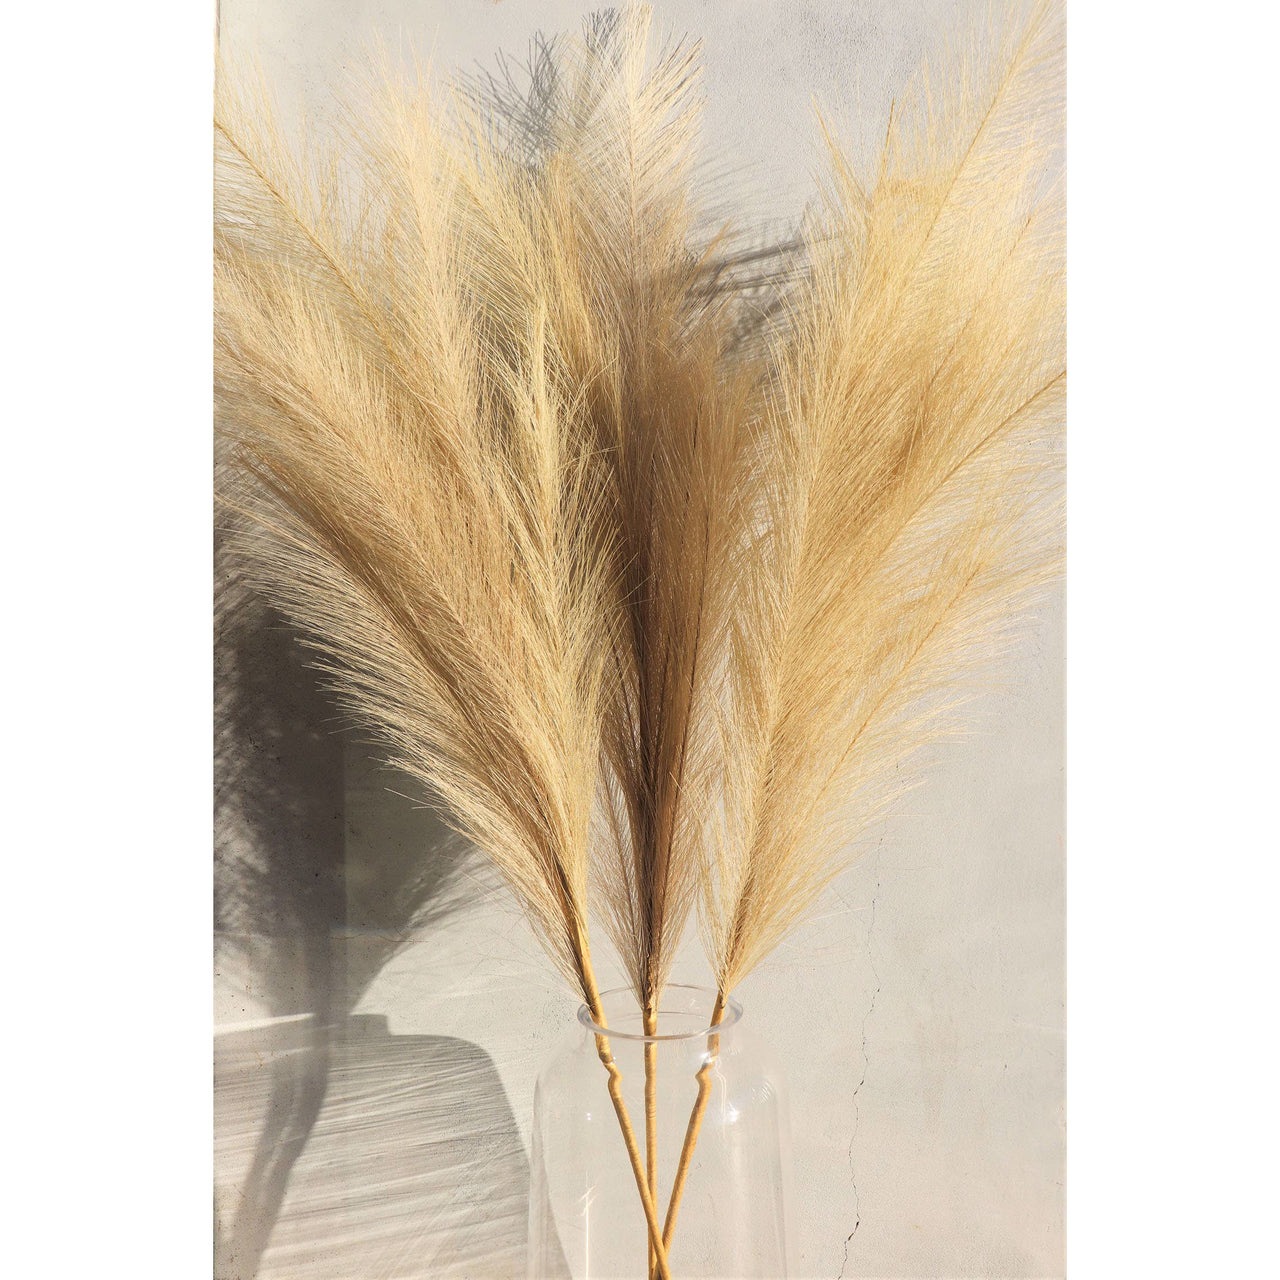 Large Cream Faux Pampas Grass - Individual Artificial Flora Wildflower Co.   